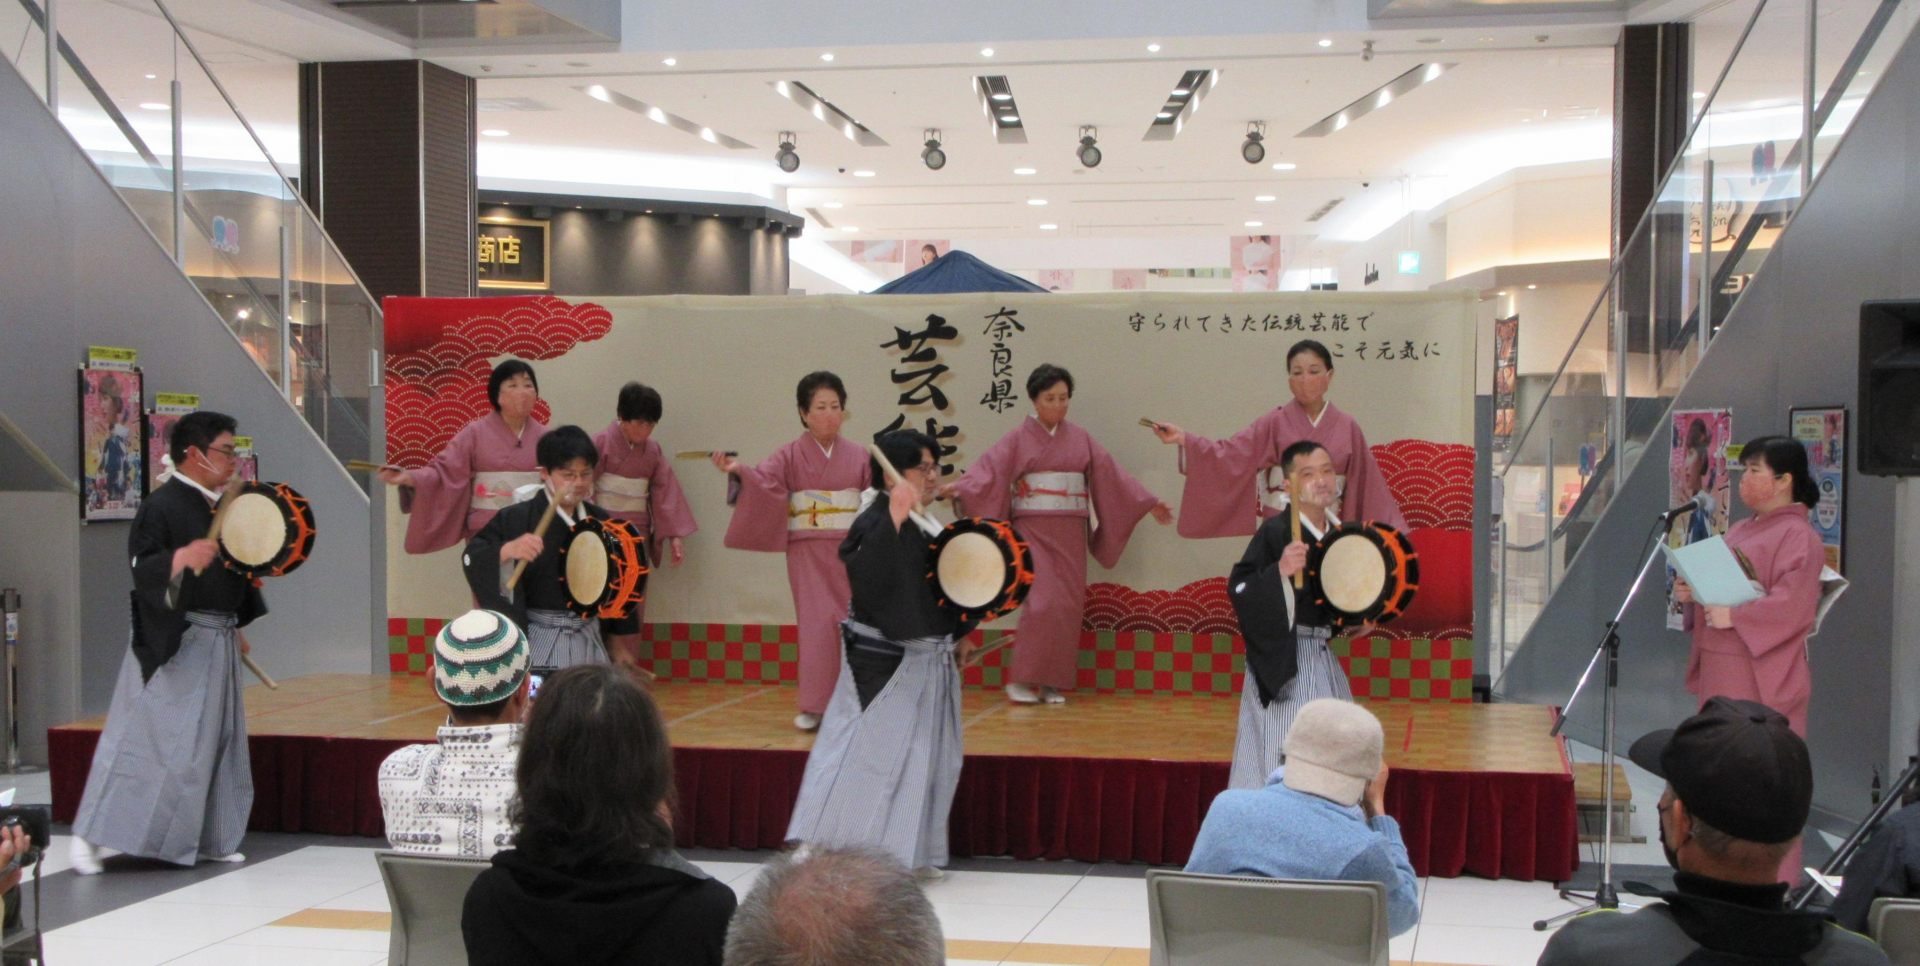 The Shinohara Dance developed as a Shinto ritual and an entertaining performing art.